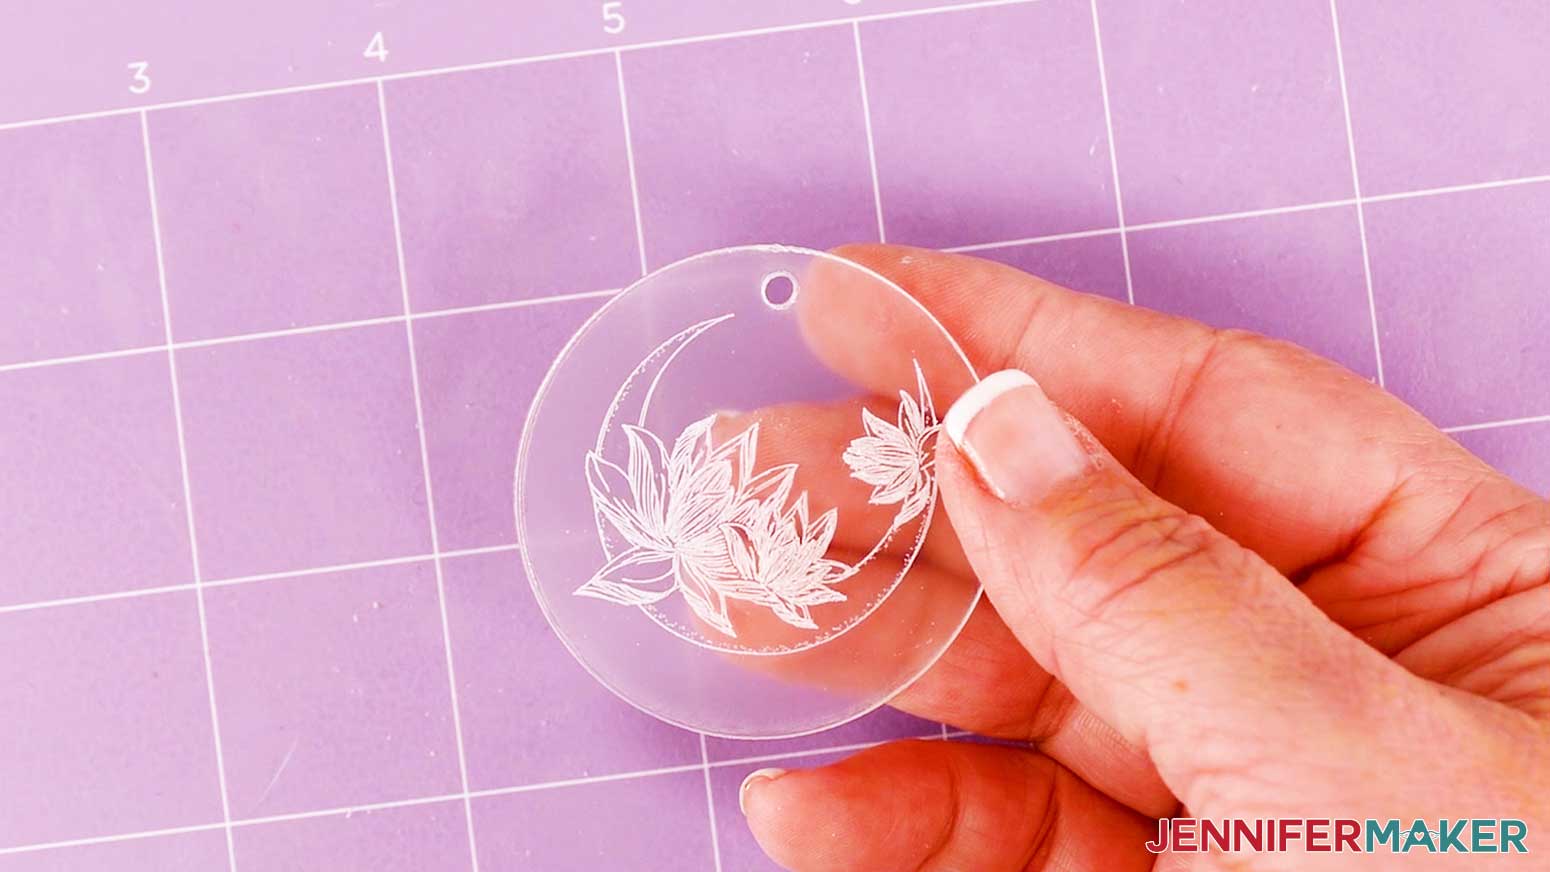 A picture of what the final engraved acrylic keychain looks like with the Moon Flower design.